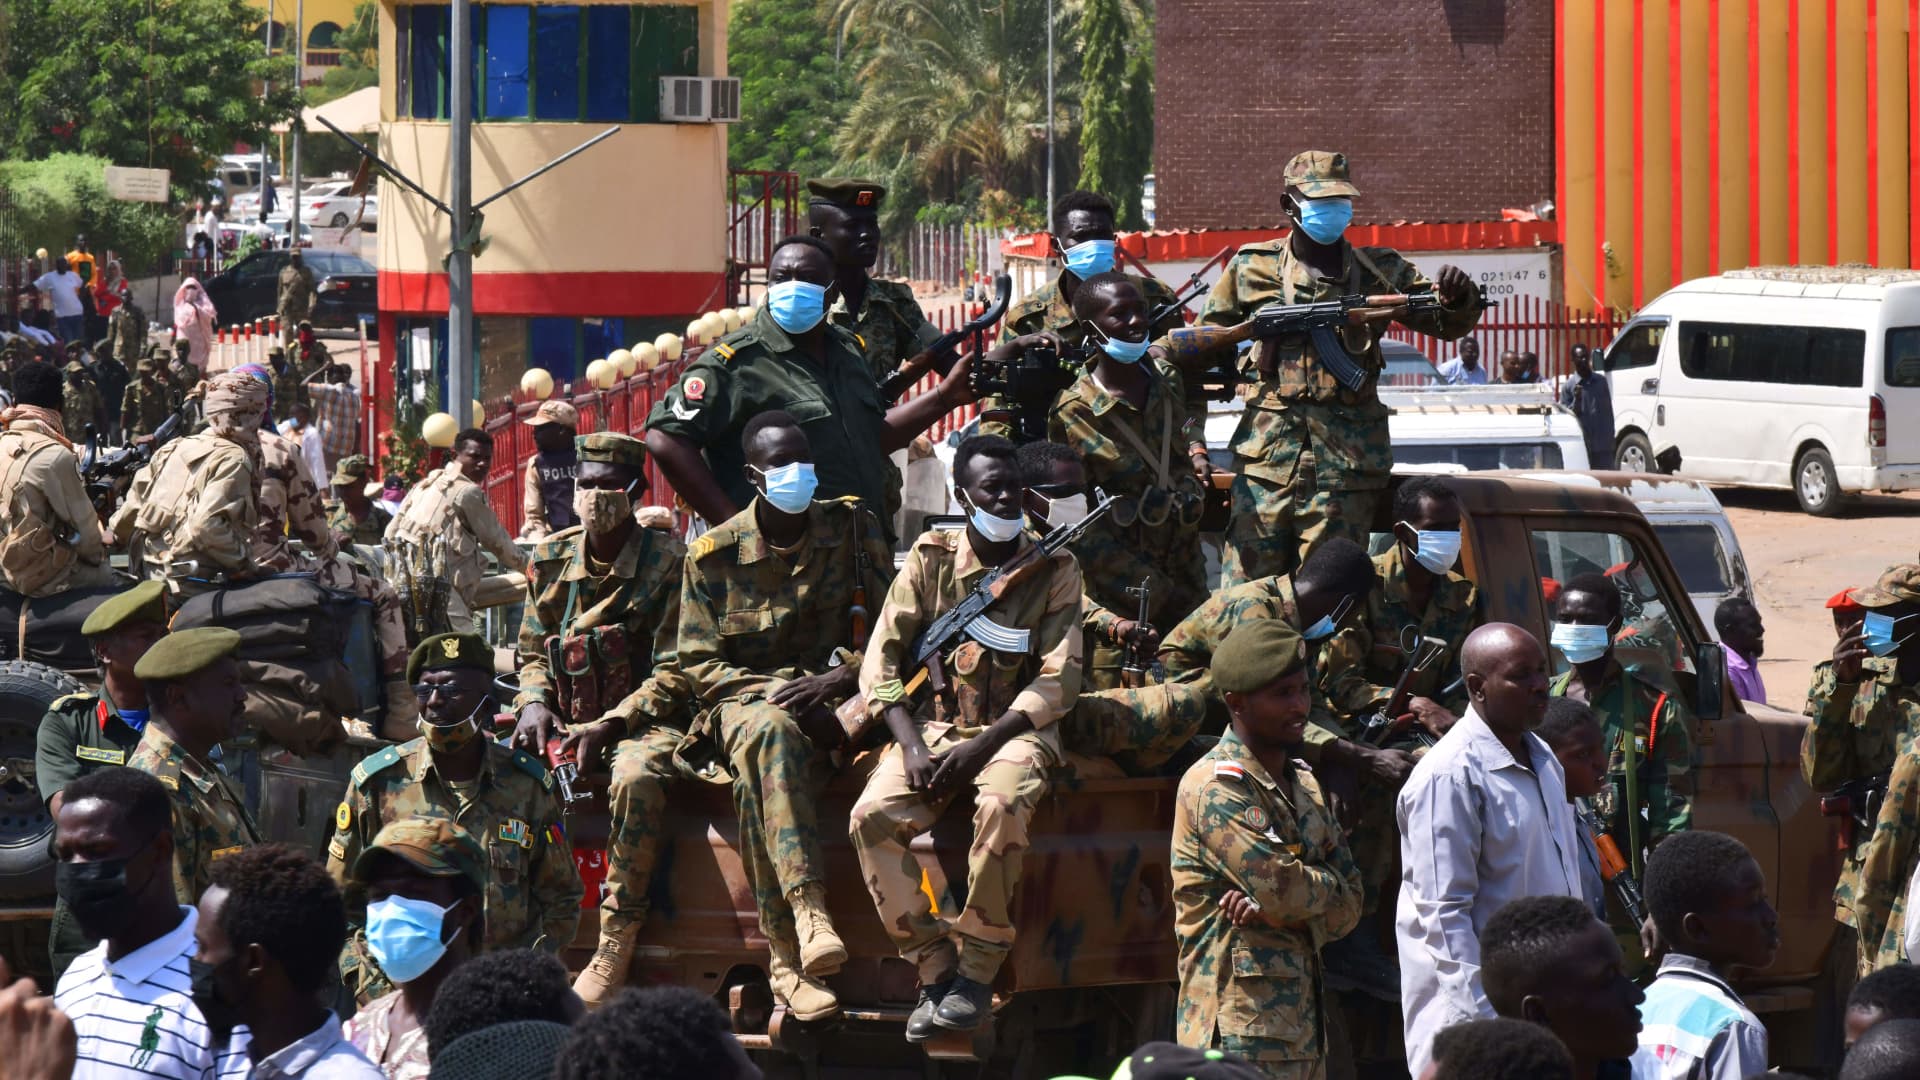 OMDURMAN, Sudan - Sudanese security forces keep watch as they protect a military hospital and government offices during protests against a military coup overthrowing the transition to civilian rule on October 25, 2021 in the capital's twin city of Omdurman.